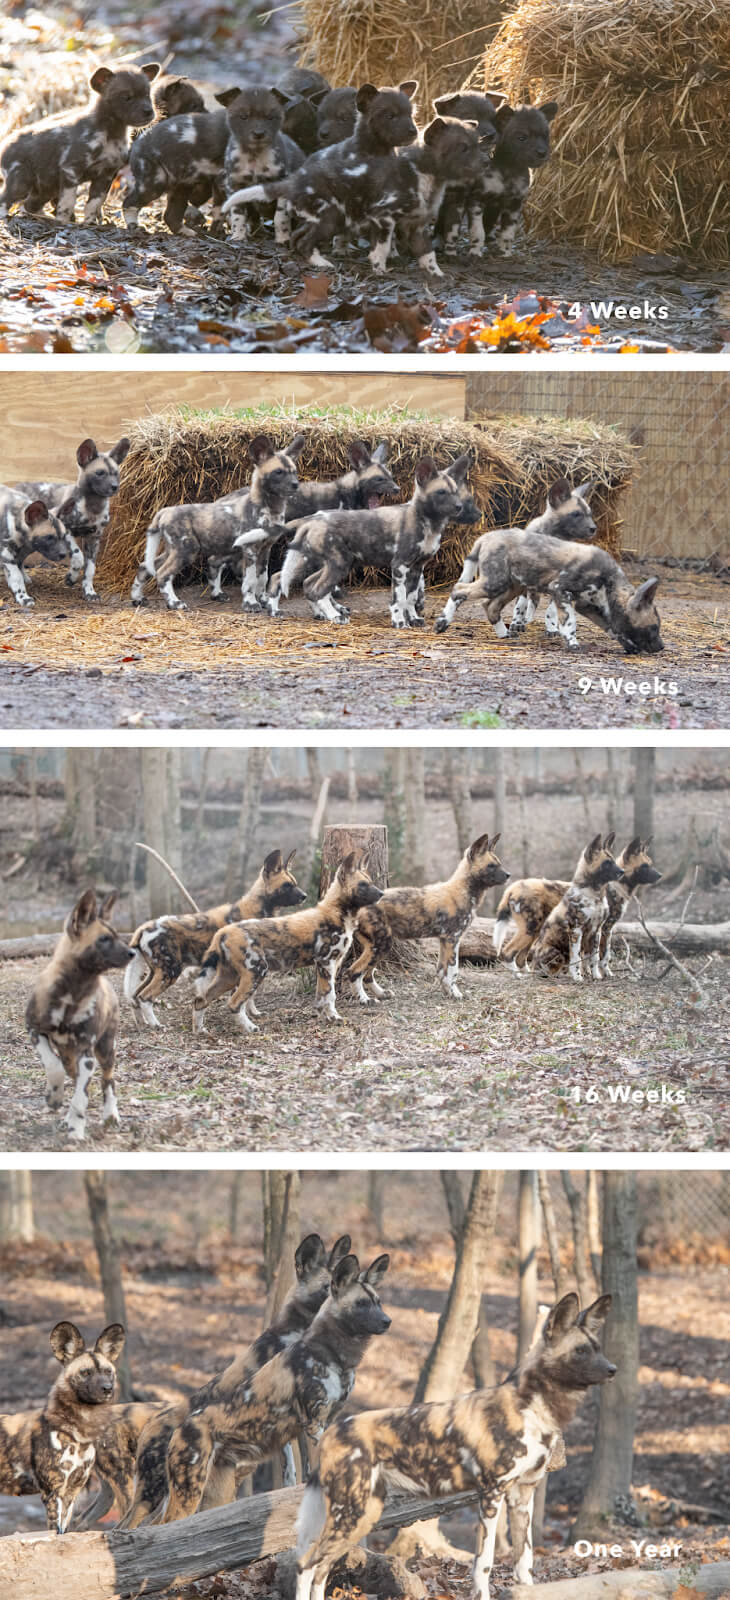 African Painted Dog Puppies from 1 week to 1 year